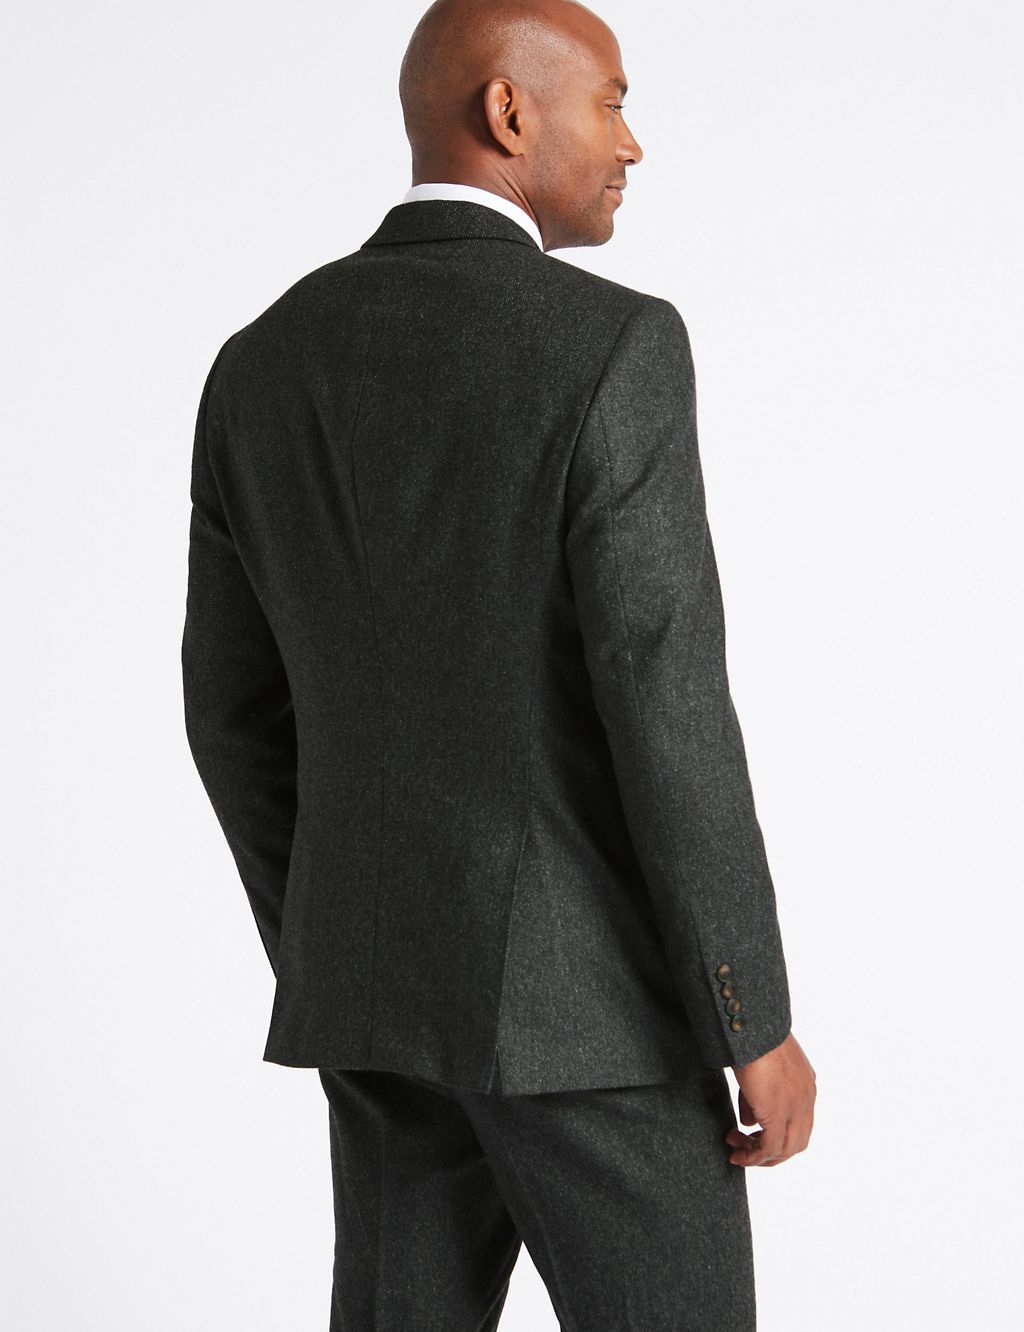 Charcoal Wool Blend Jacket with Italian Fabric 7 of 9